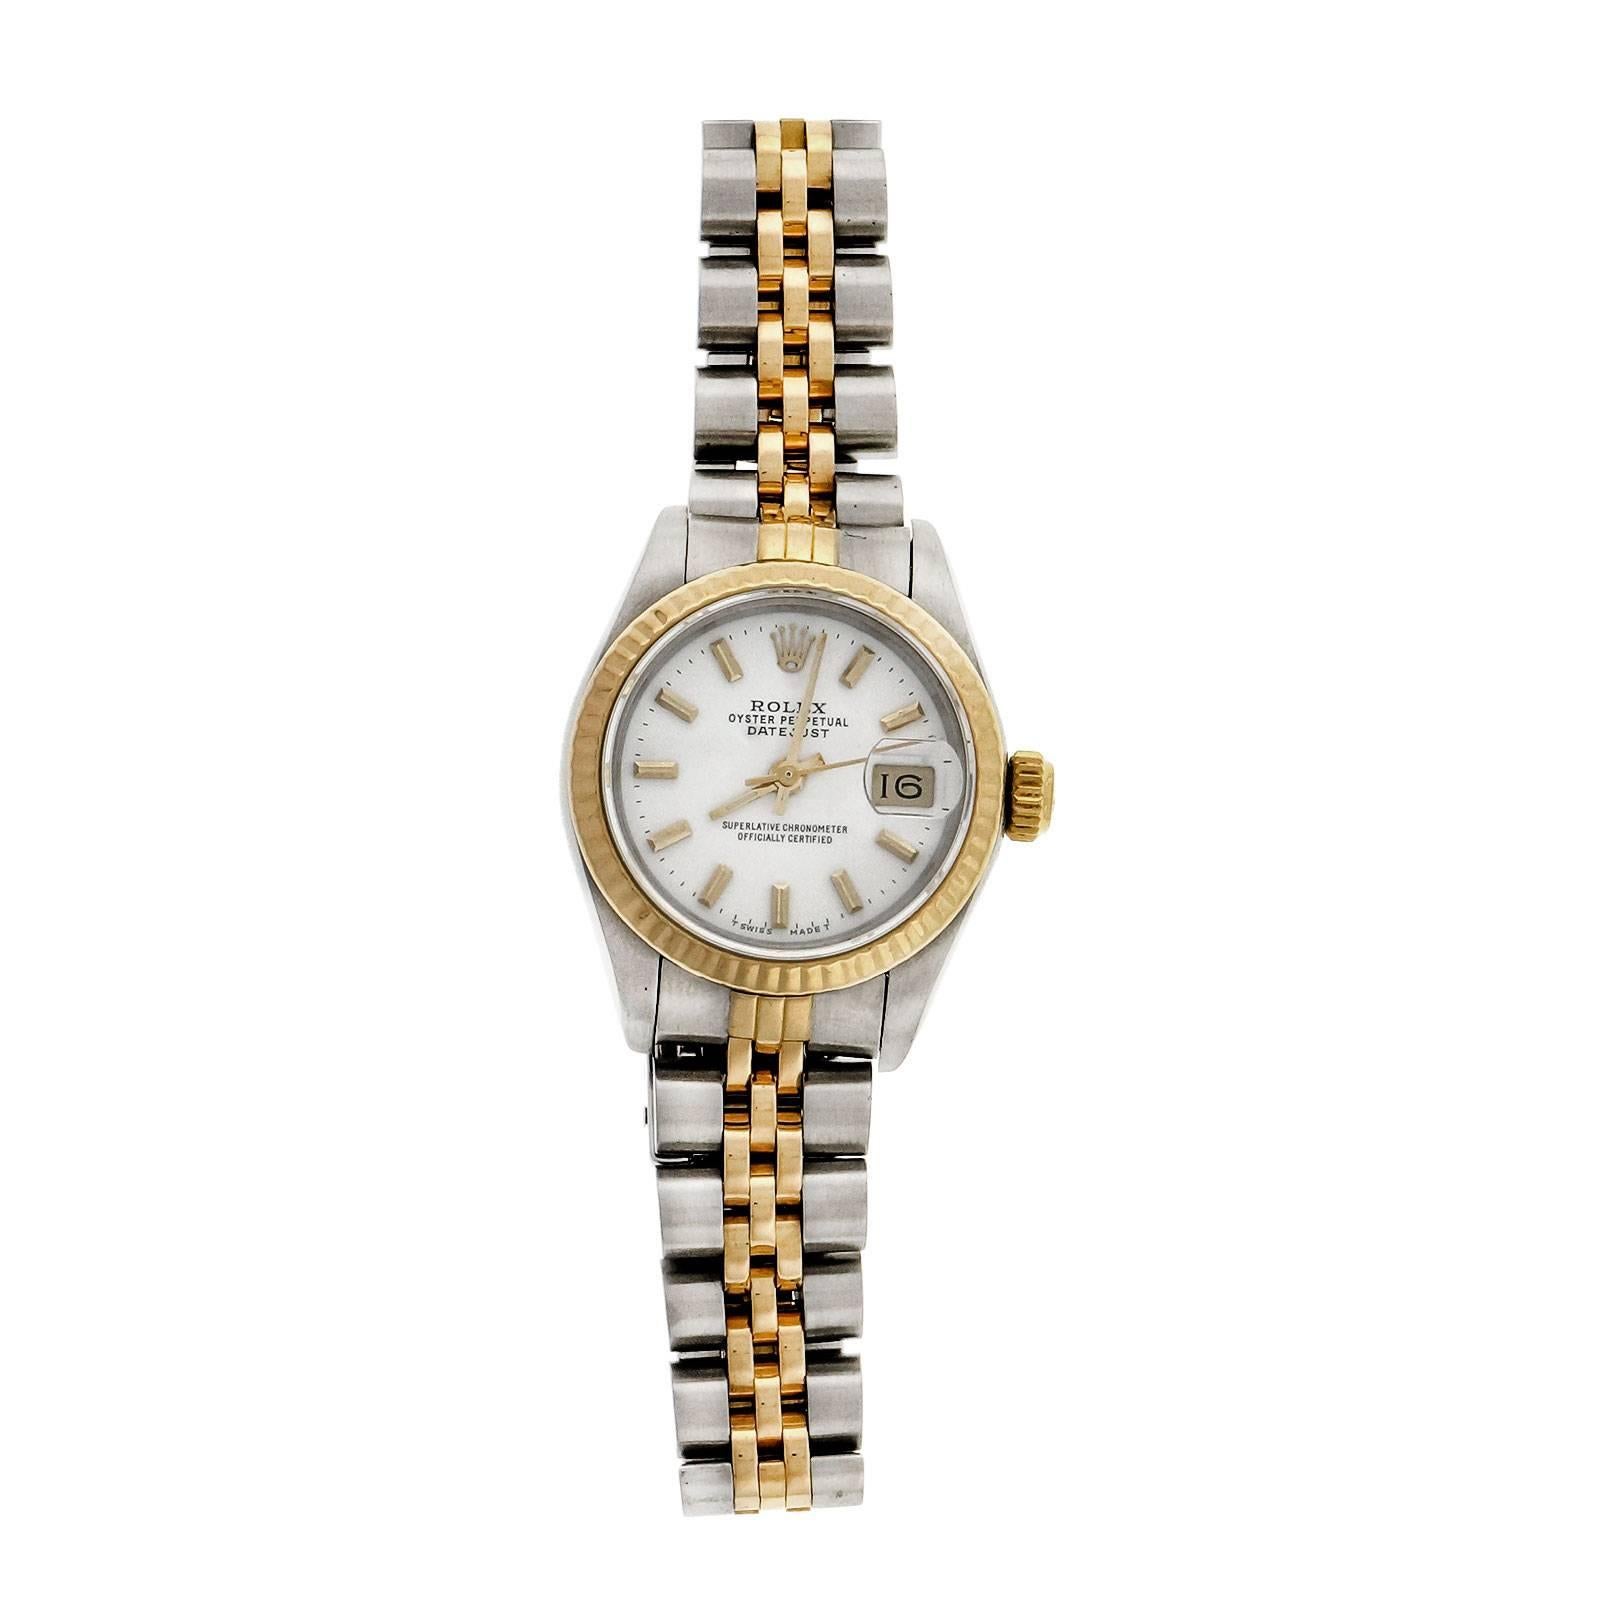 Ladies 18k gold and steel 69173 wrist watch. Rolex Oyster Perpetual Datejust with Sapphire crustal and Jubilee band. Custom colored white dial refinished by Peter Suchy Jewelers.

18k Yellow Gold and Steel
Band length: 7 inches
Length: